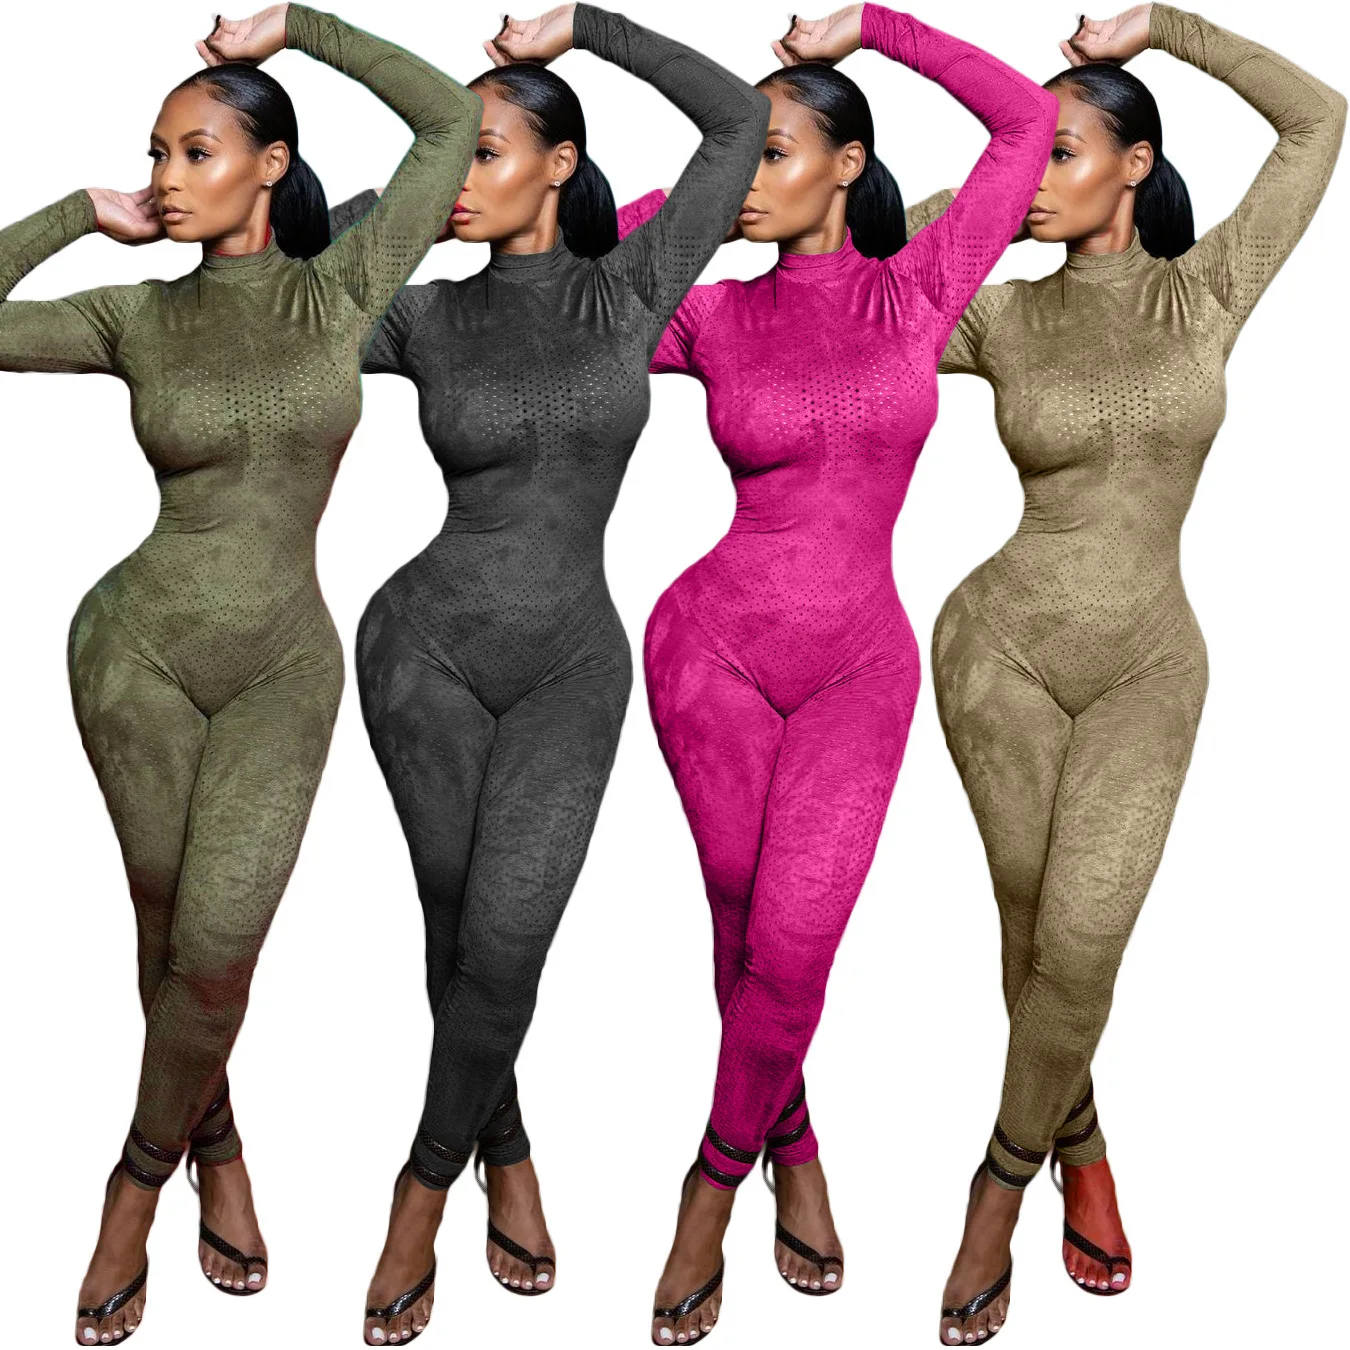 

Tie Dye Gauze Mesh Hollow Out Jumpsuit Woman Long Sleeve Turtleneck Skinny One Piece Overalls Casual Fitness Sporty Outfits